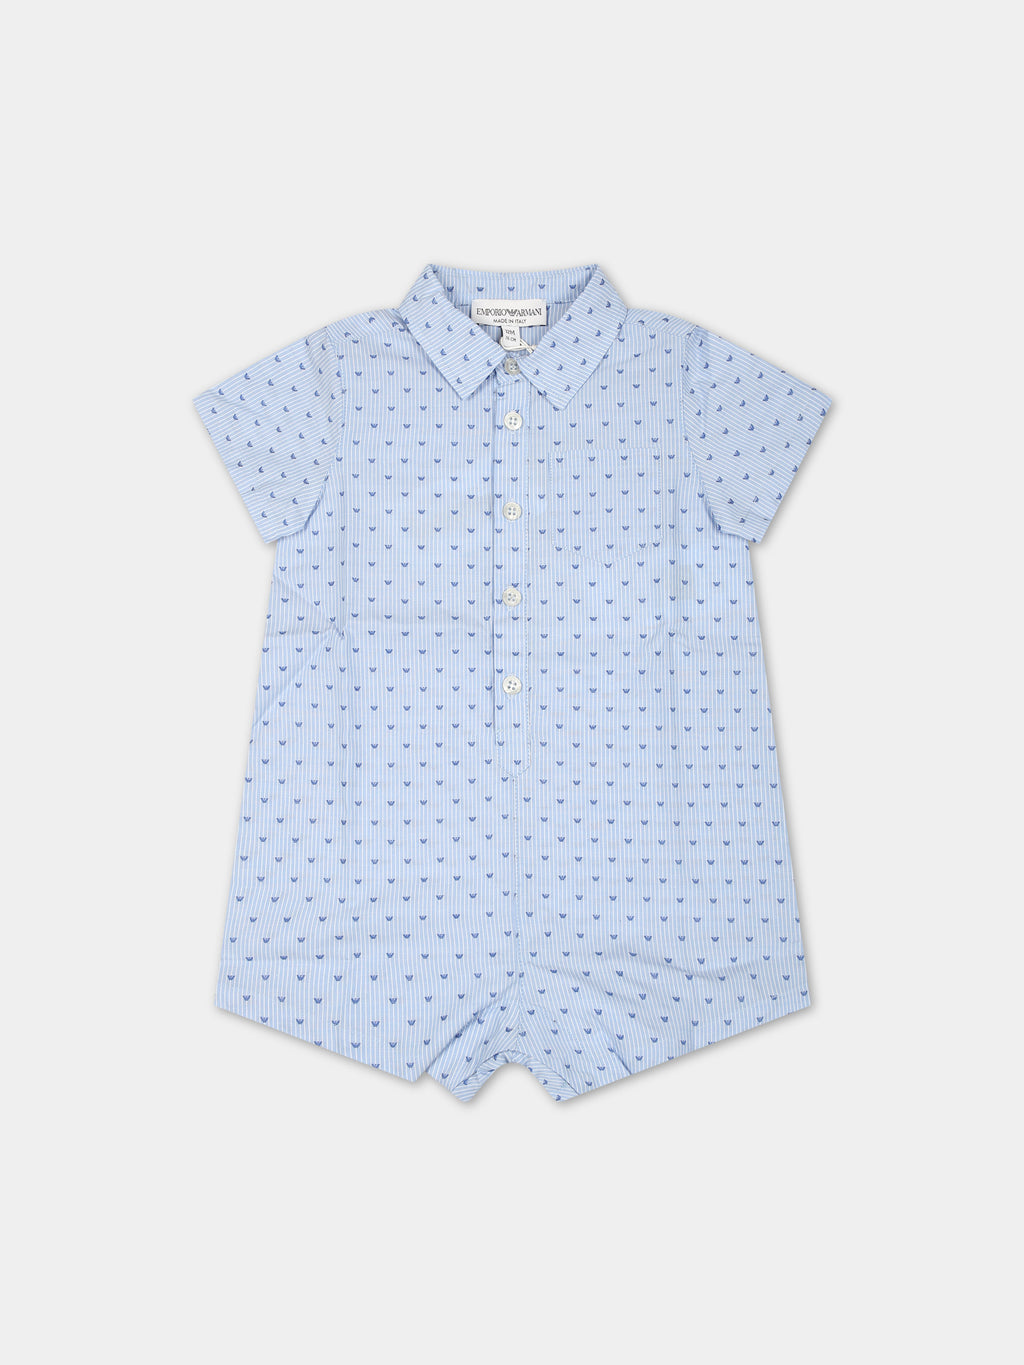 Light blue cotton romper for baby boy with eagle